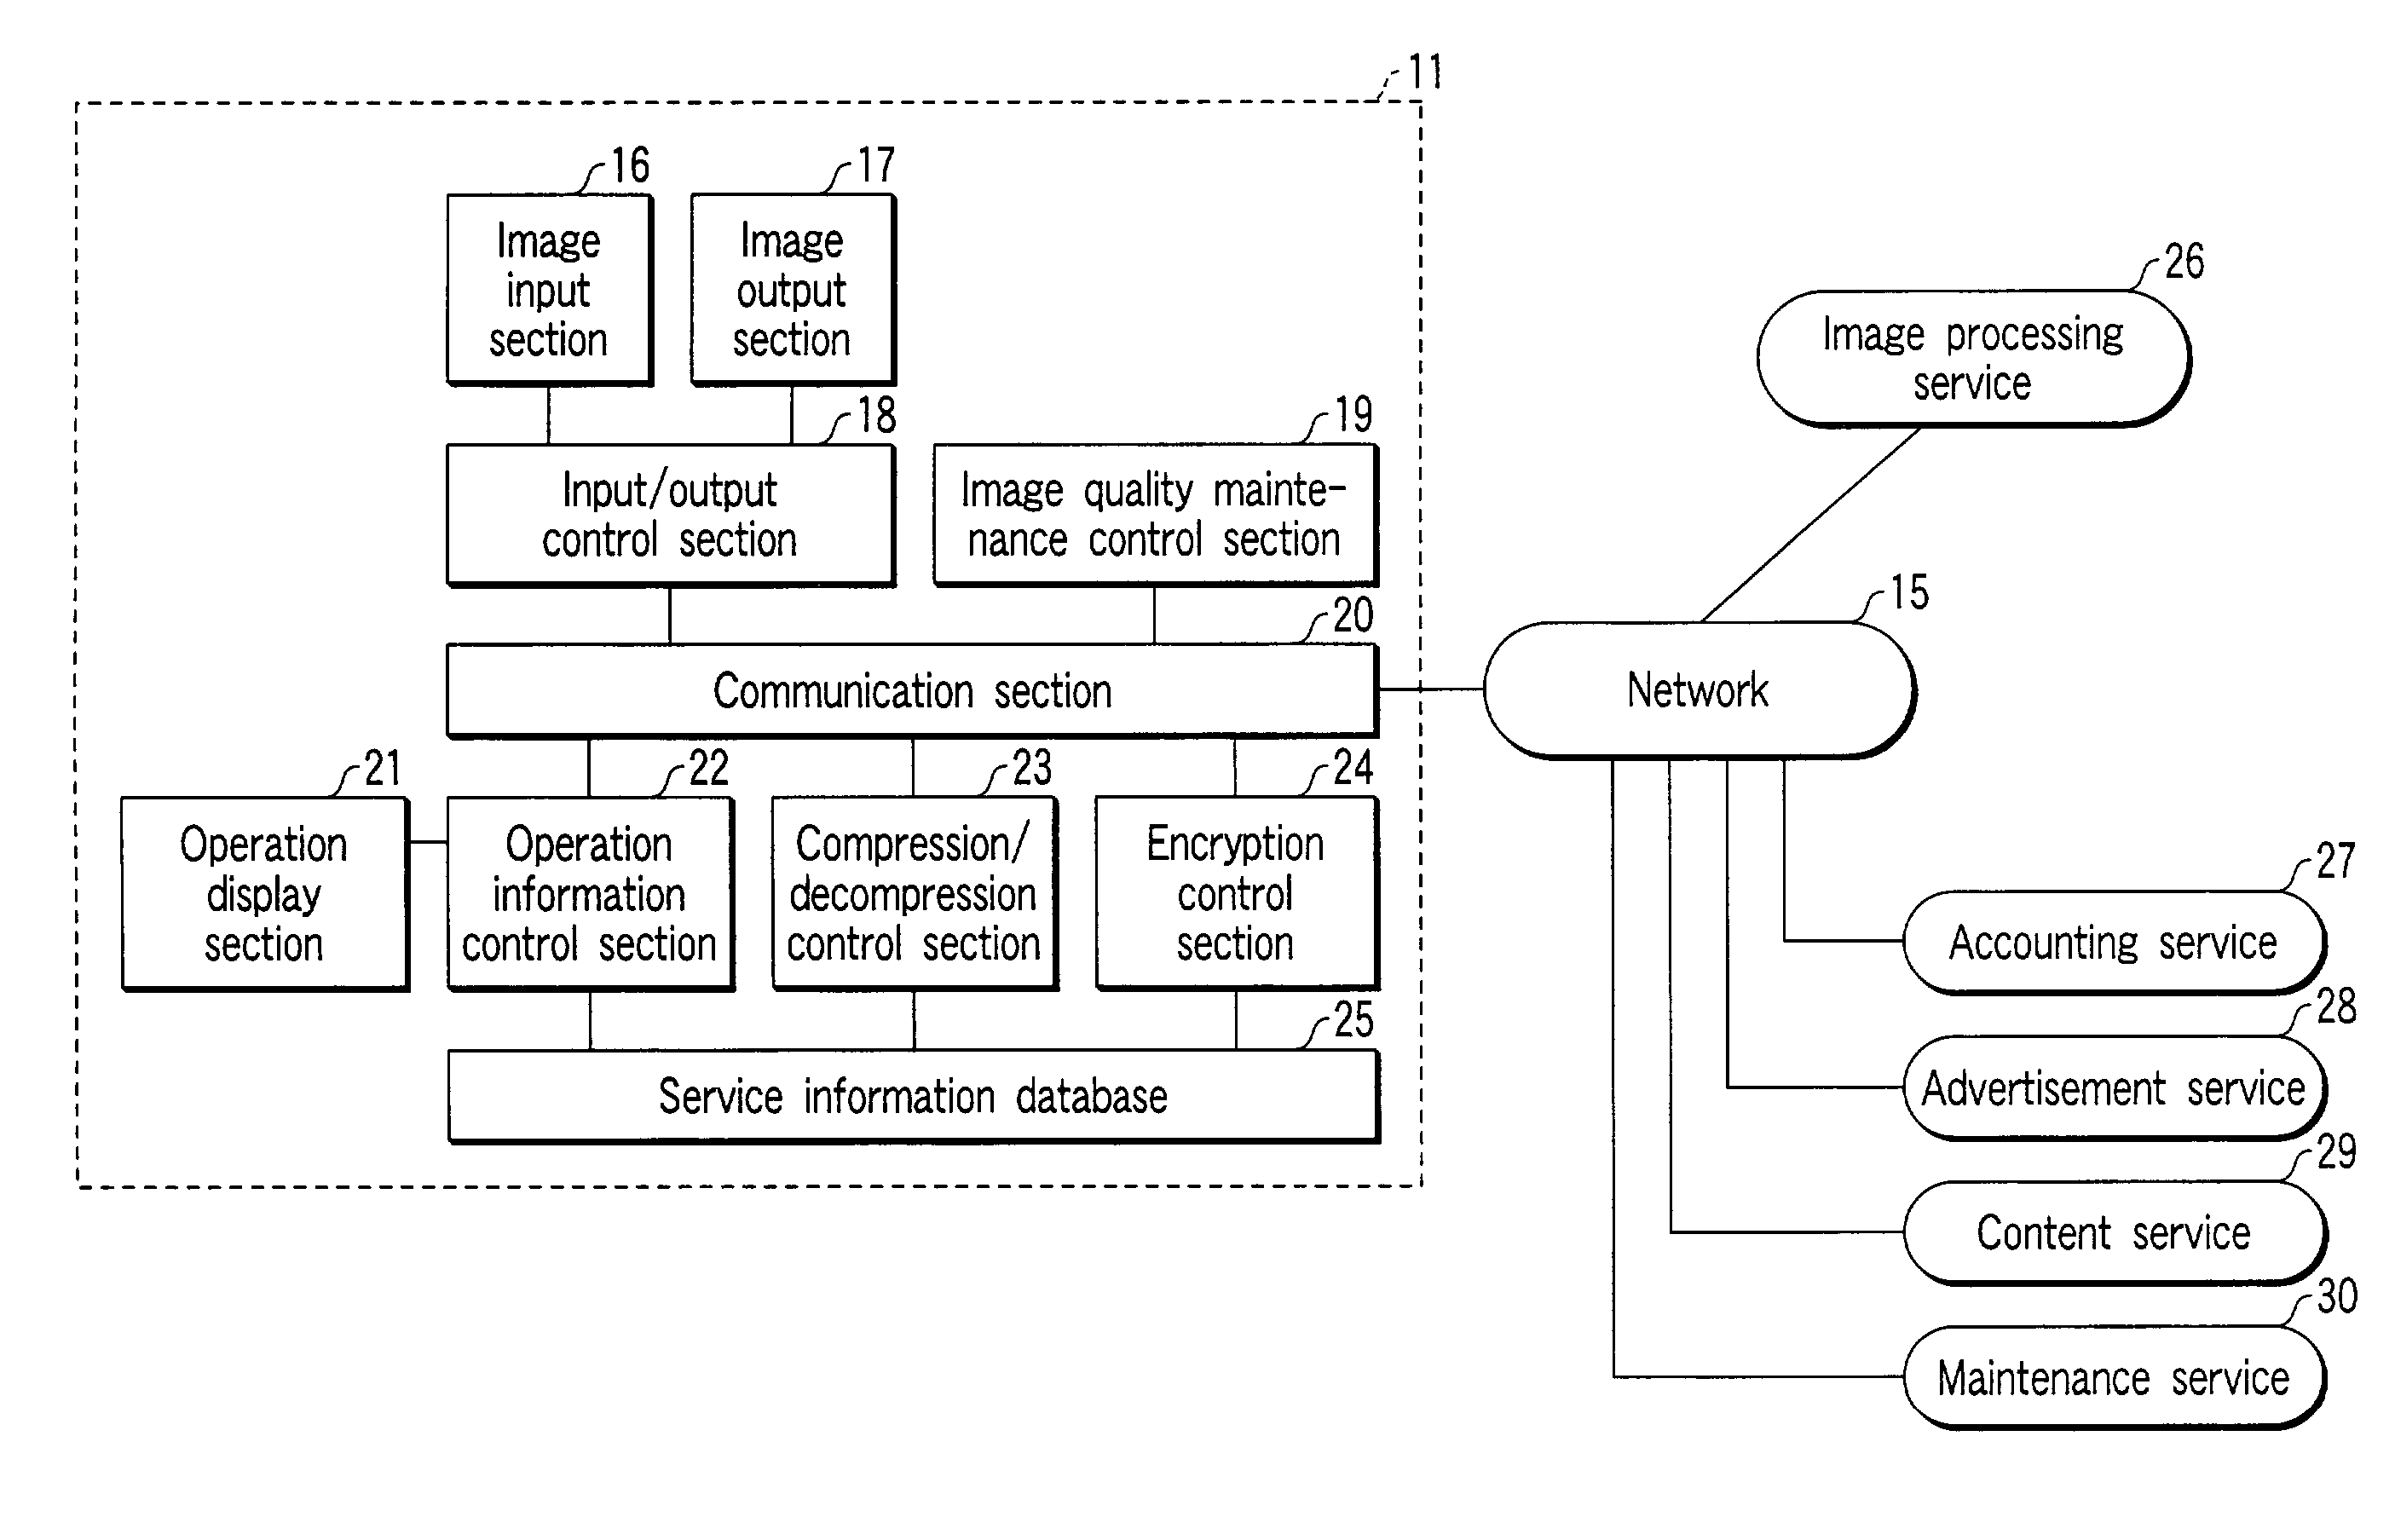 Image processing service system